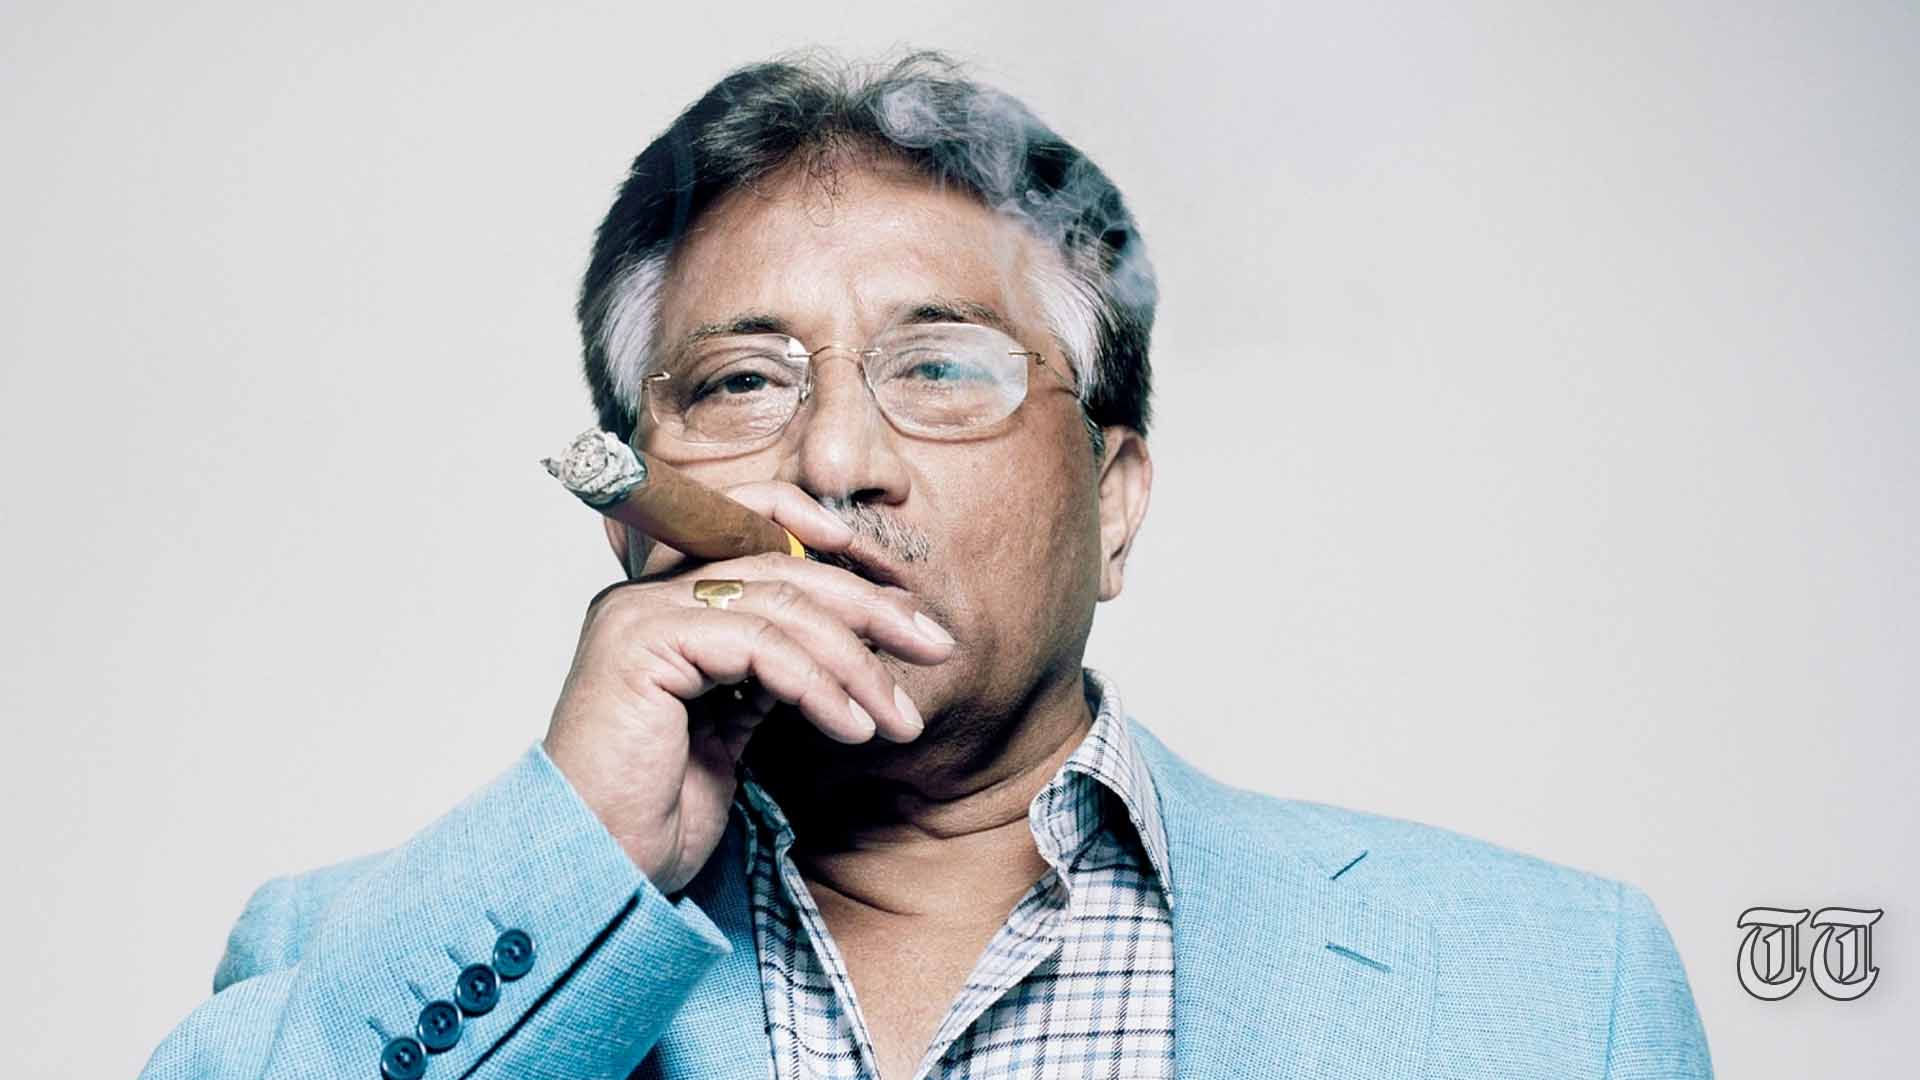 A file photo is shown of former president Pervez Musharraf in 2012.